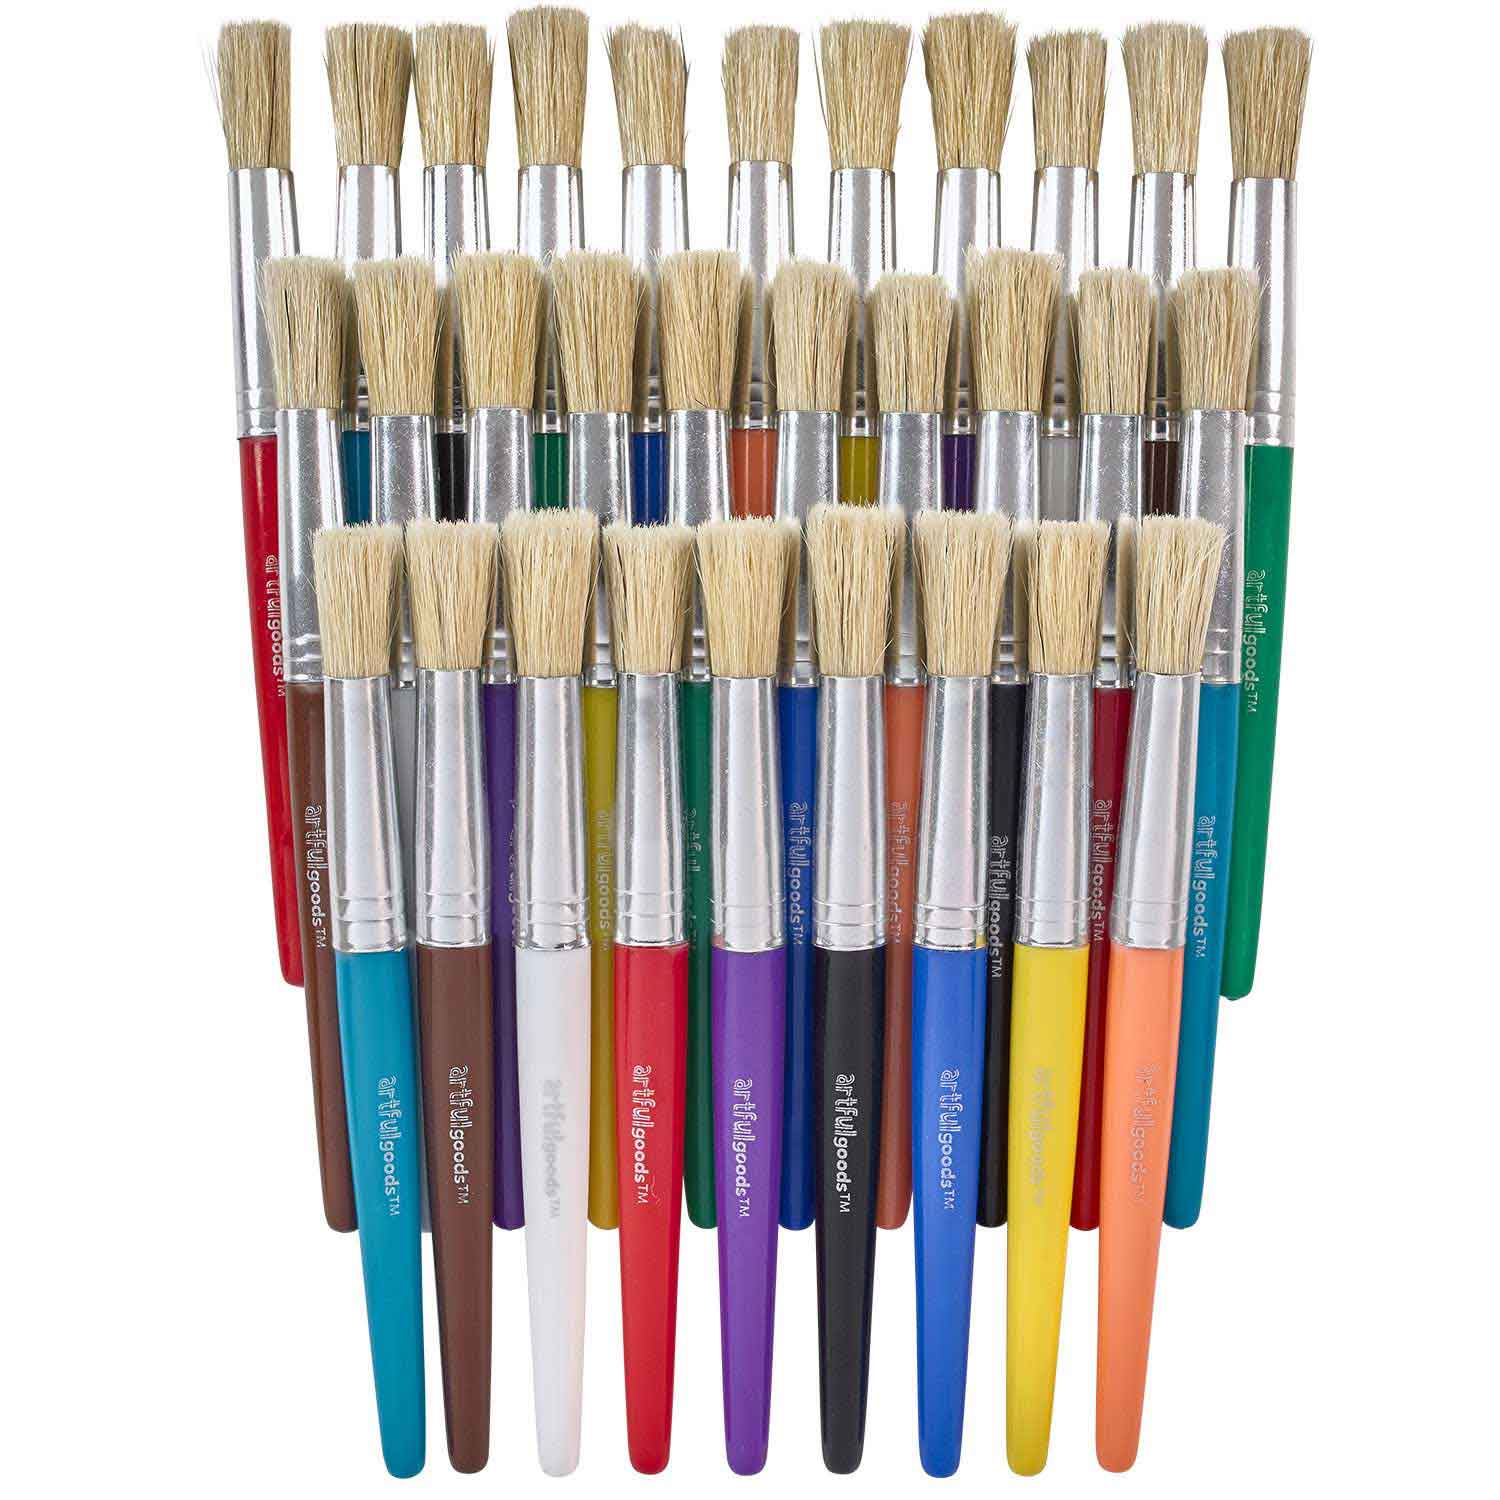 School Paint Brushes & Paint Brushes for Kids